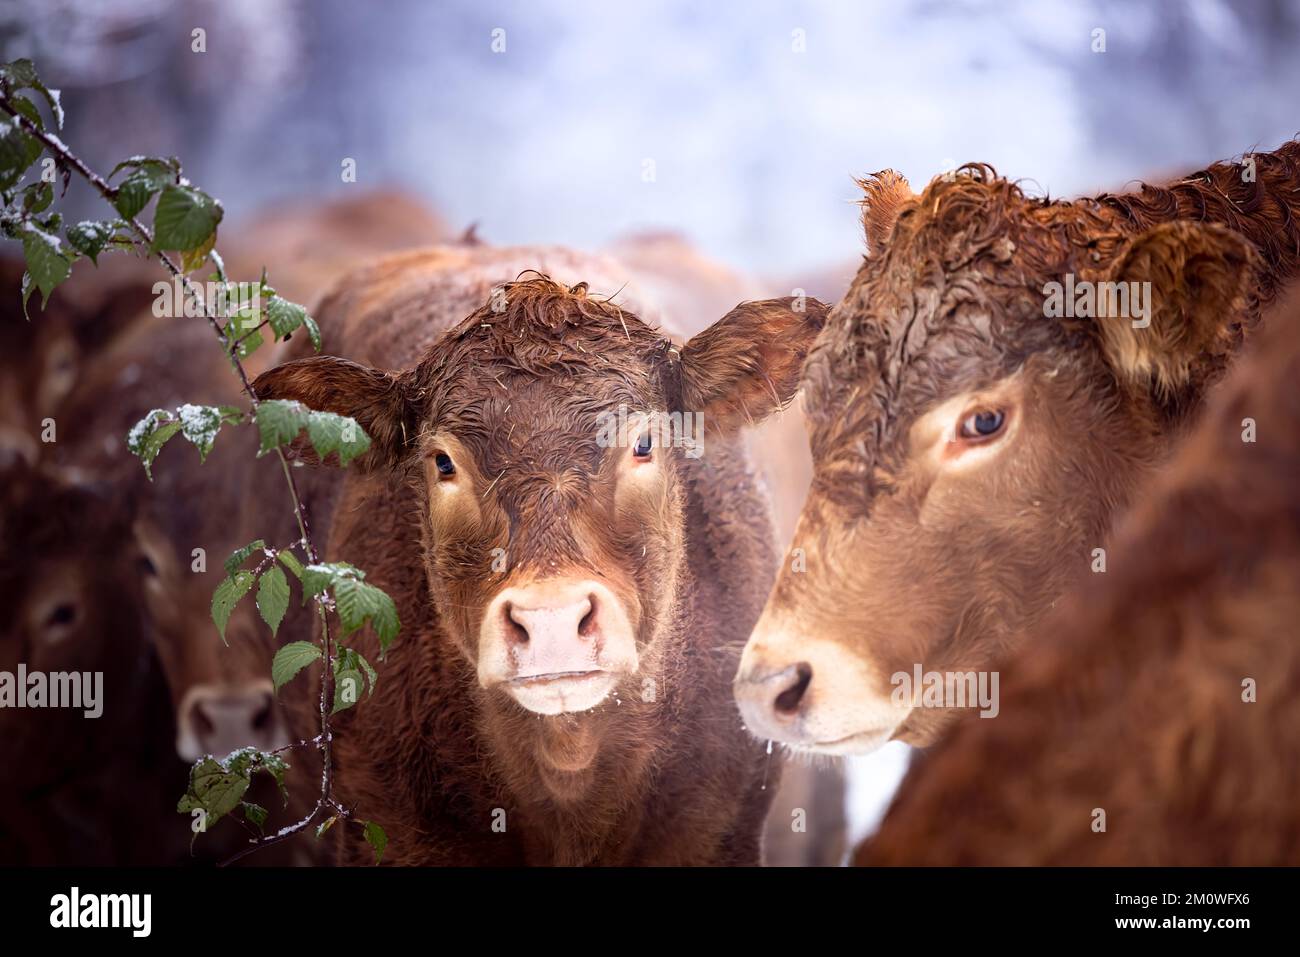 A herd of brown furry cows in snow in Germany in winter, white trees in  the background Stock Photo